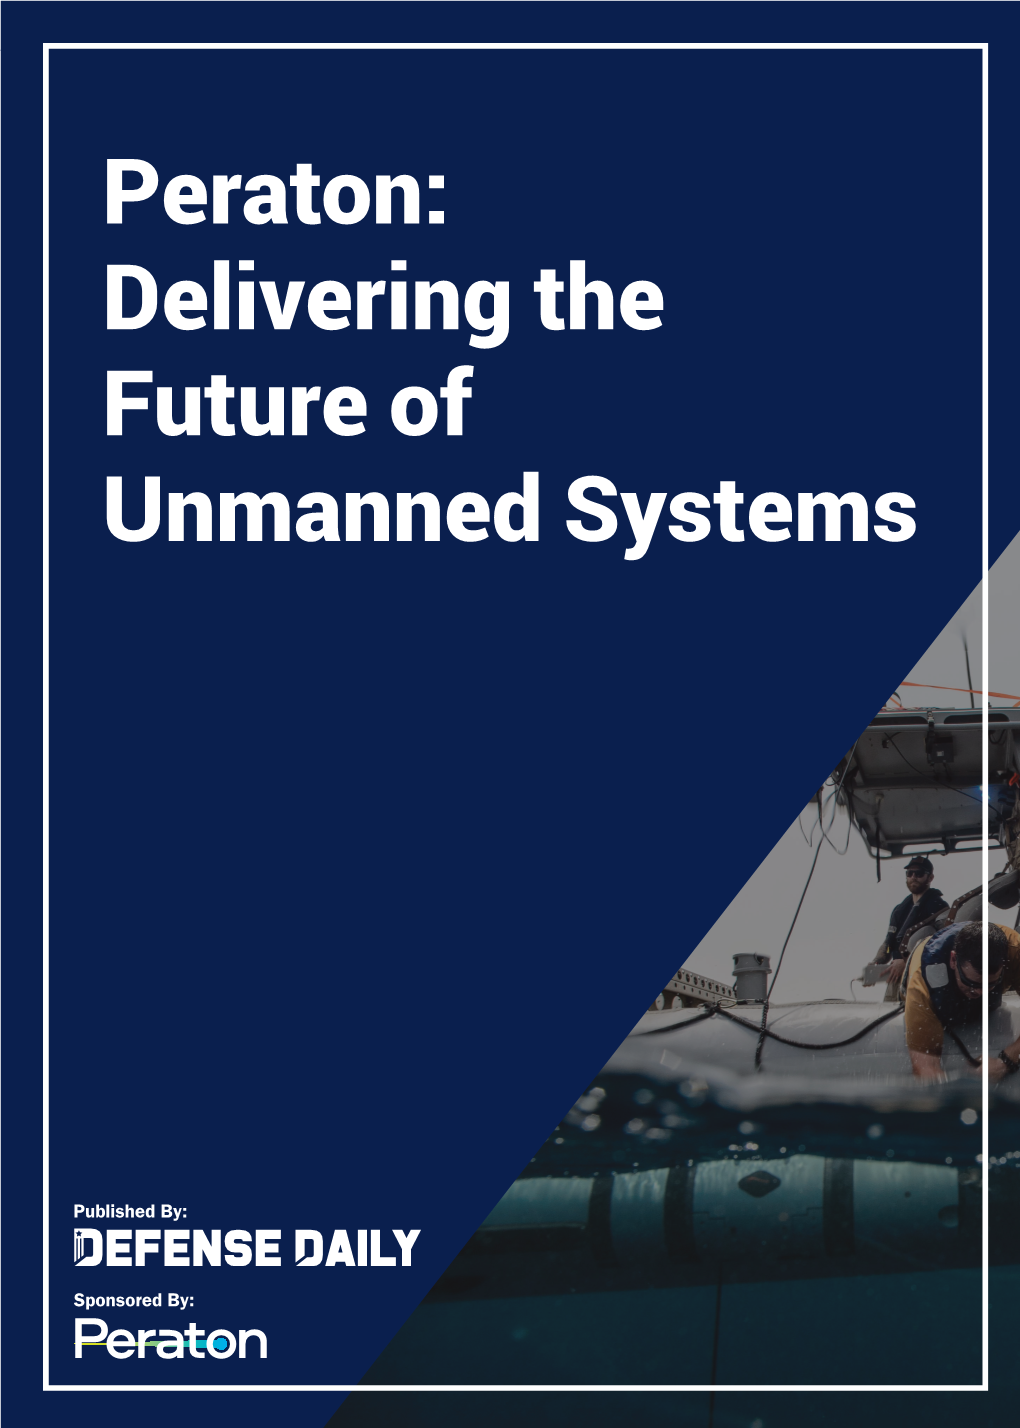 Peraton: Delivering the Future of Unmanned Systems